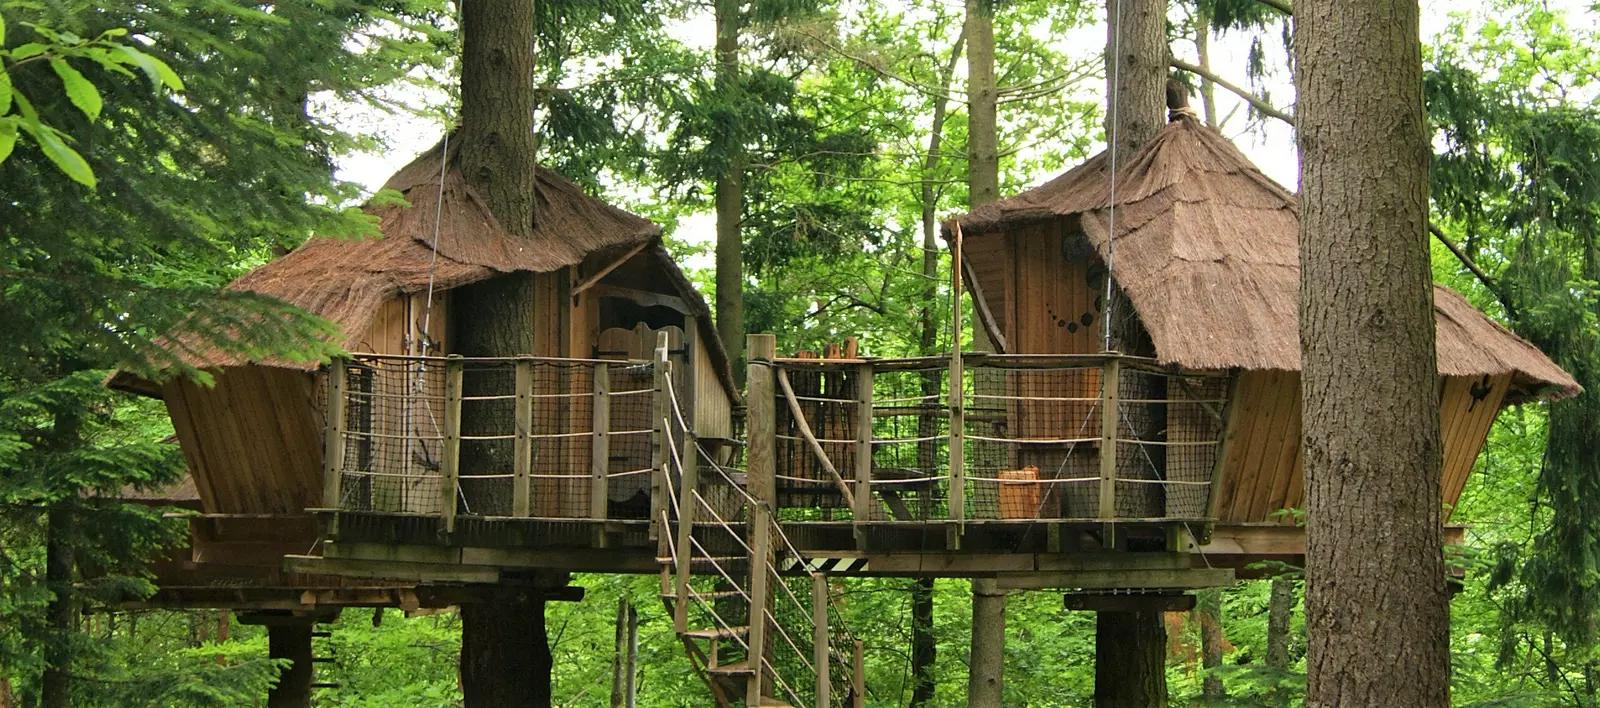 Two authentic treehouses